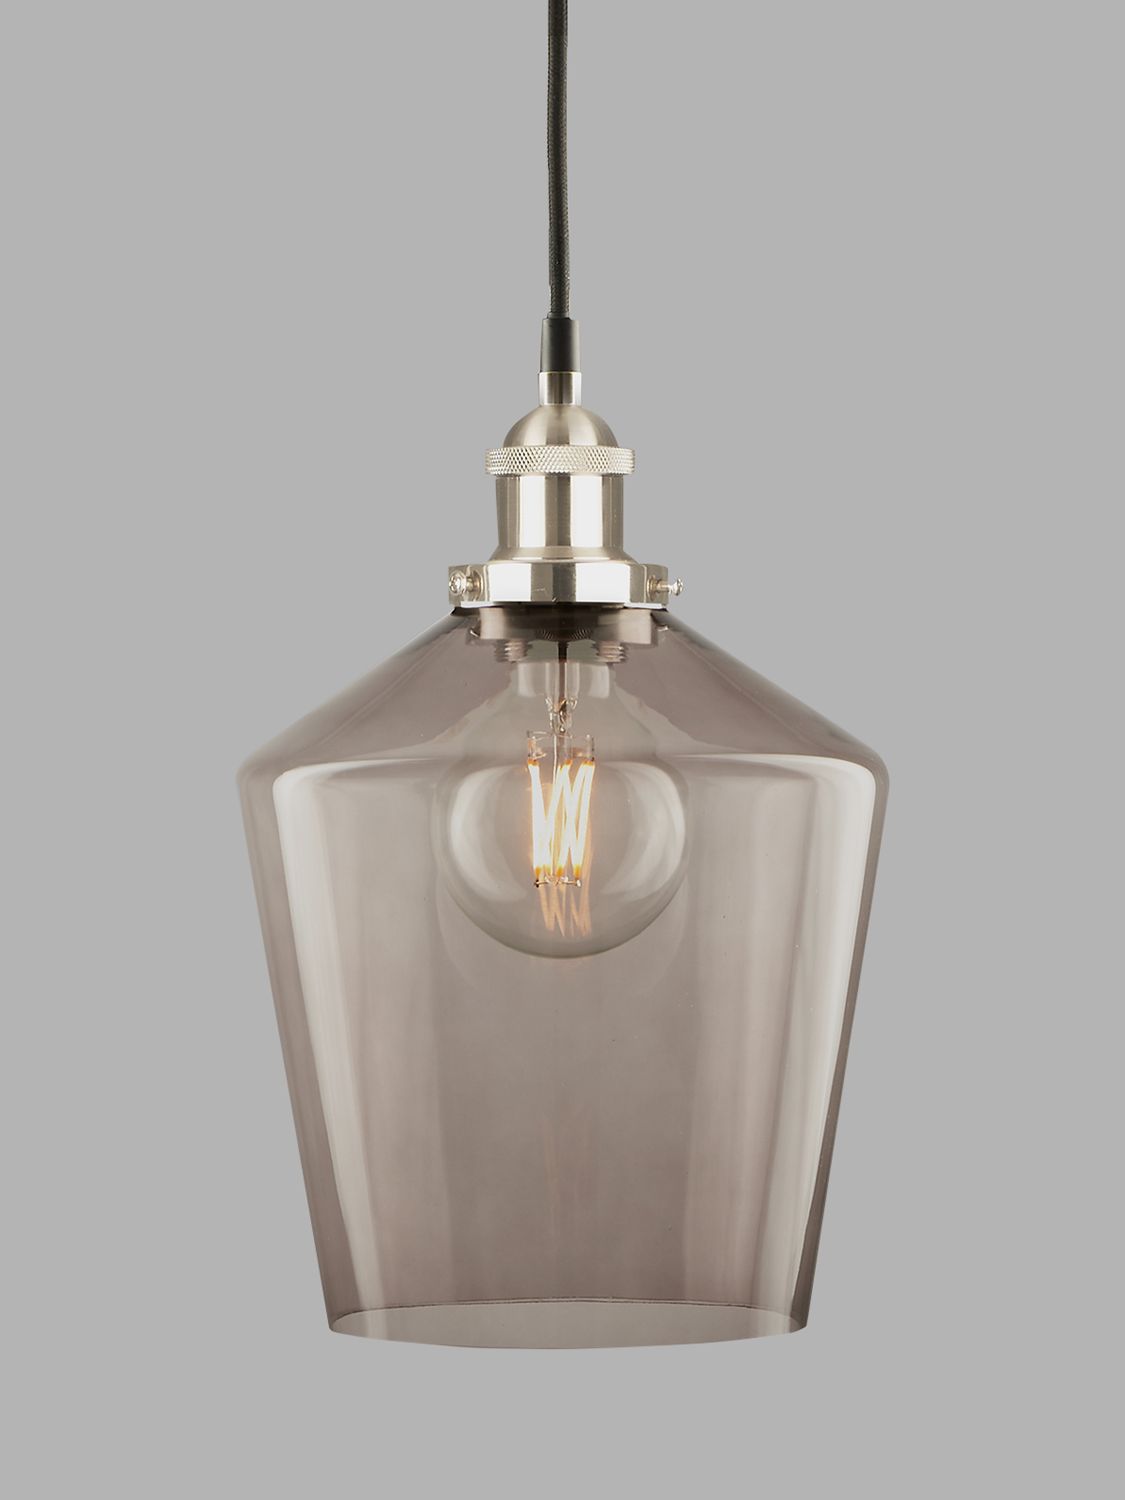 Pacific Lifestyle Glass Pendant Ceiling Light, Smoke/Silver